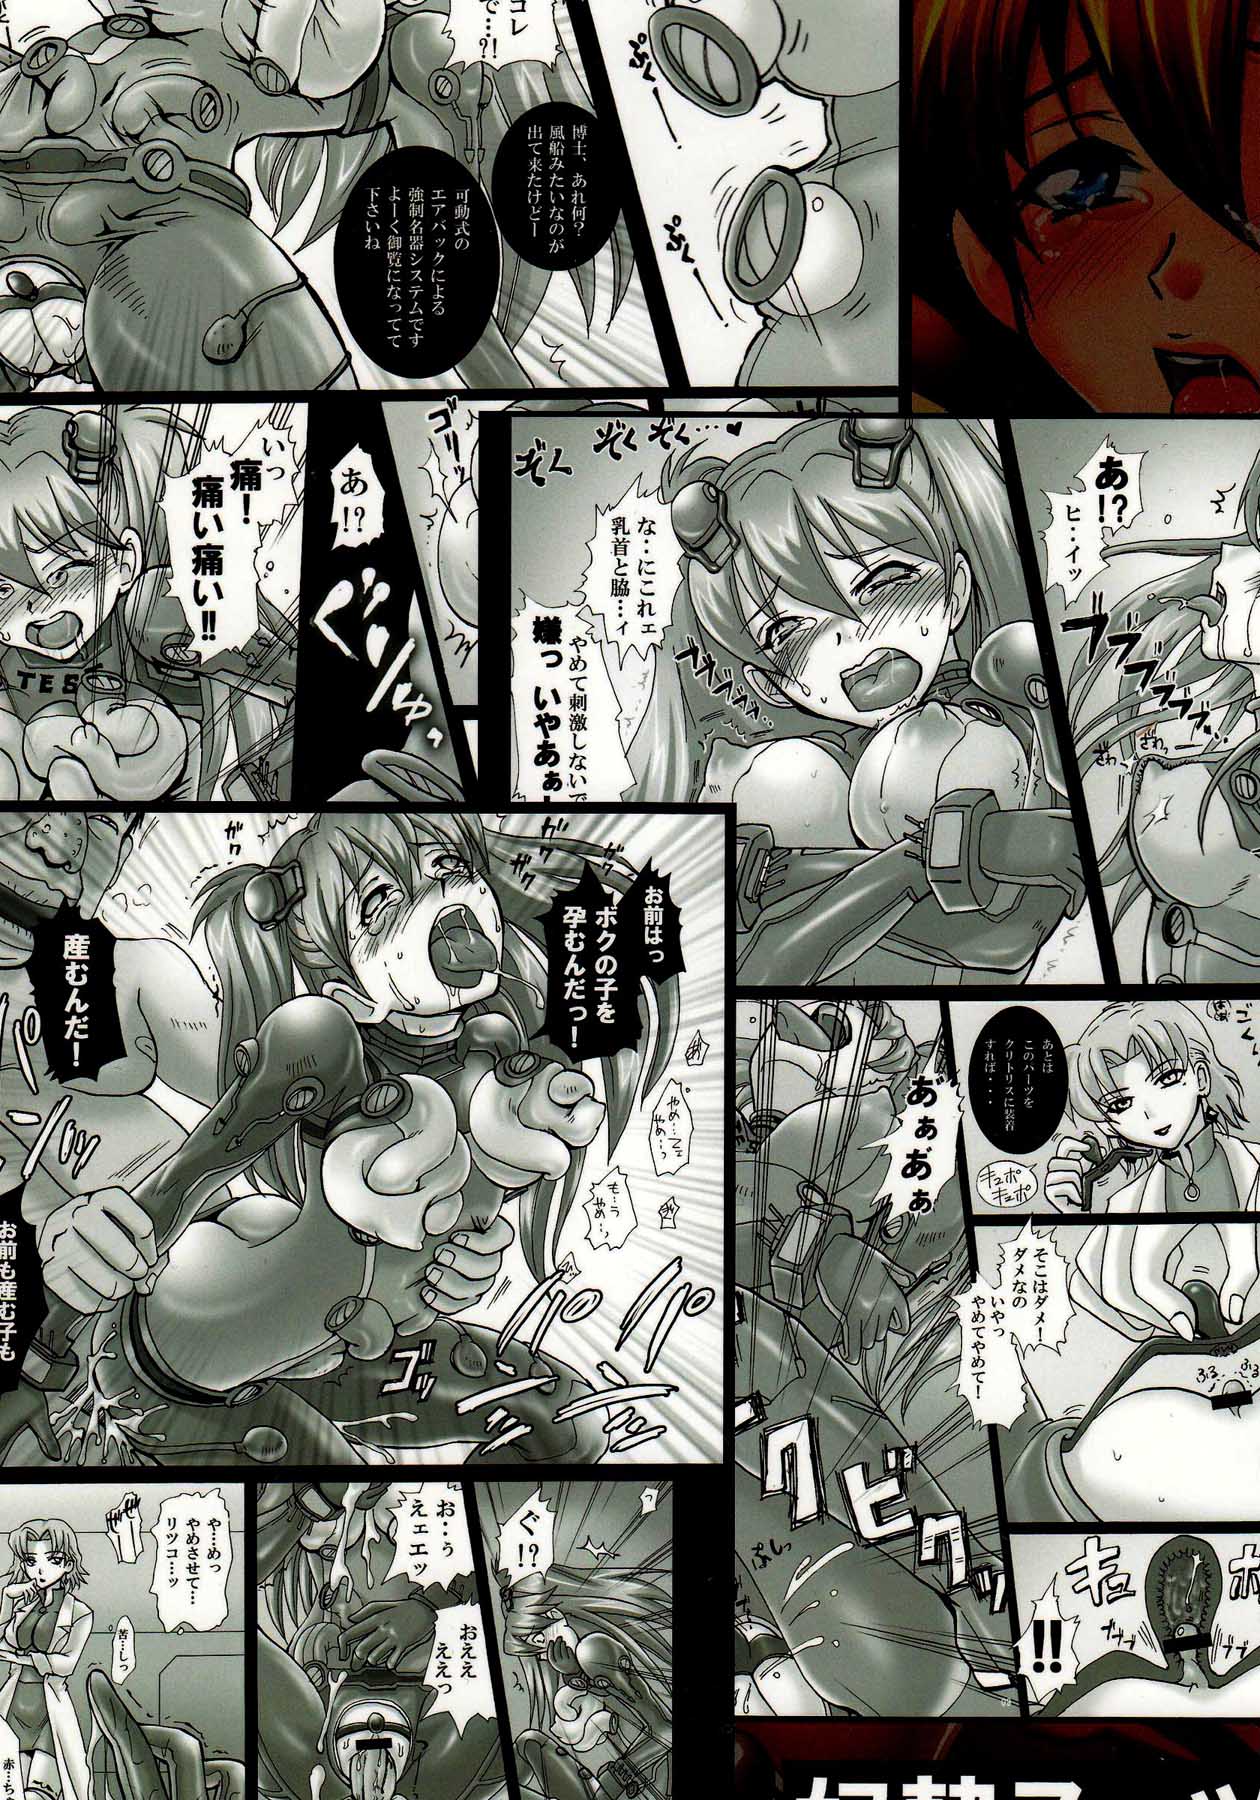 [Modaetei+Abalone Soft] Slave Suit and Fuck Toy (Neon Genesis Evangelion)[English][Little White Butterflies] page 26 full